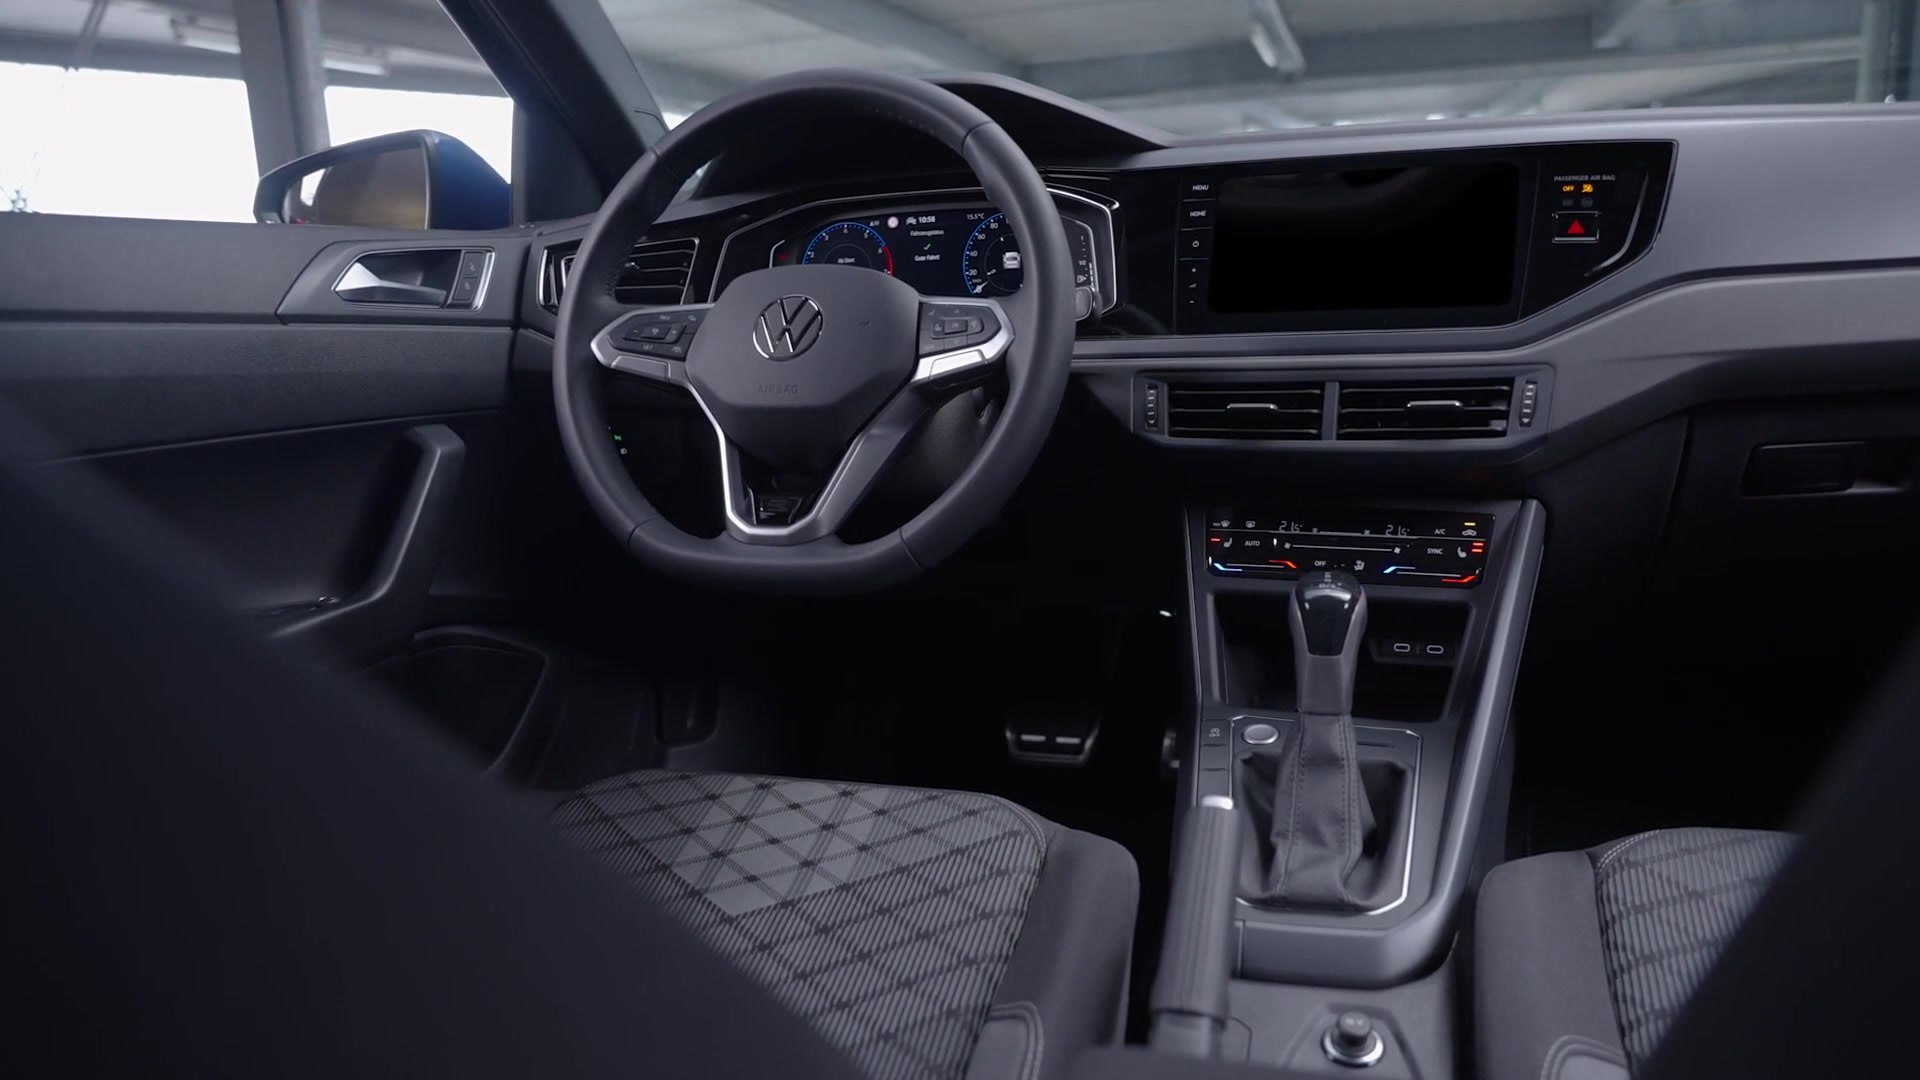 The new Volkswagen Polo R-Line Interior Design - video Dailymotion